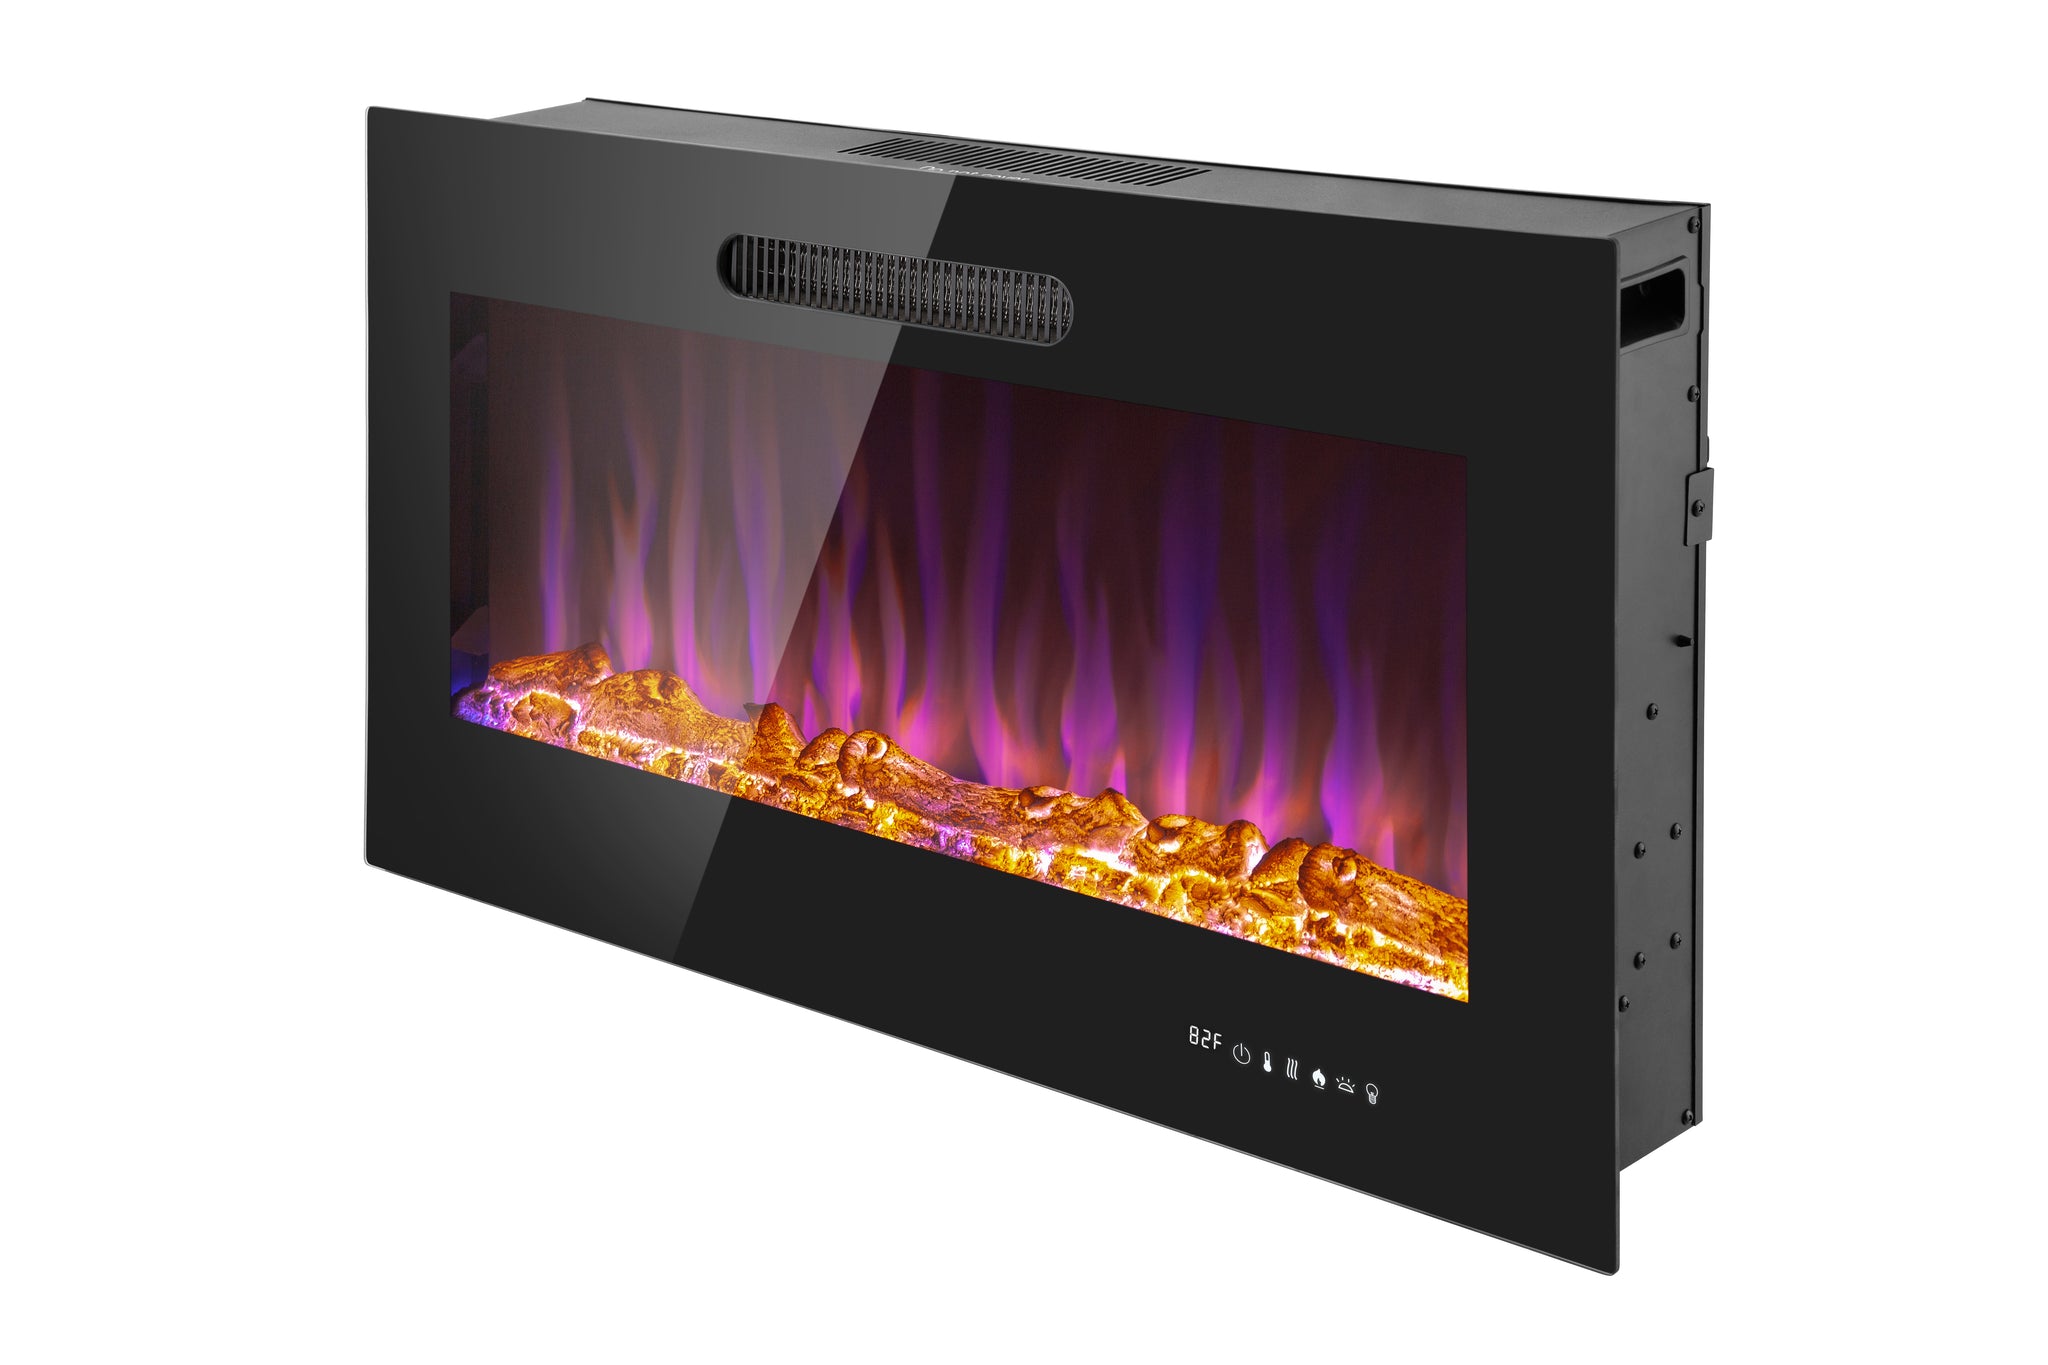 36 Inch LED Slim Design Electric Fireplace Insert and Wall Mounted Fireplace with 1500 Watt Heater, Log & Crystal Ember Options, Adjustable Realistic Flame and Remote Control by Prominence Home